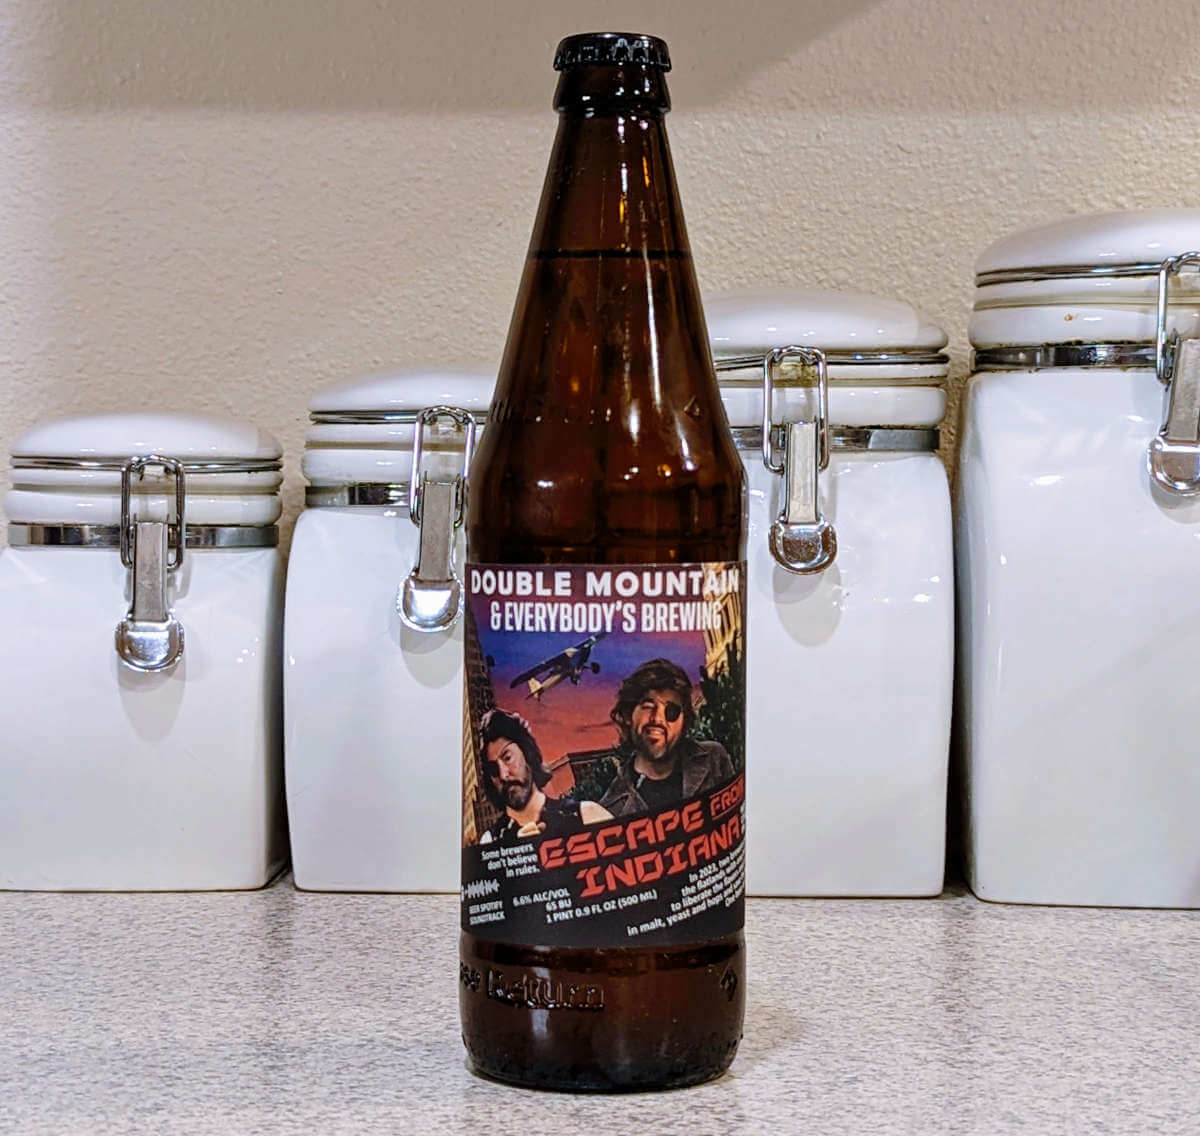 Double Mountain Brewery and Everybody’s Brewing release Escape From Indiana IPA (received)